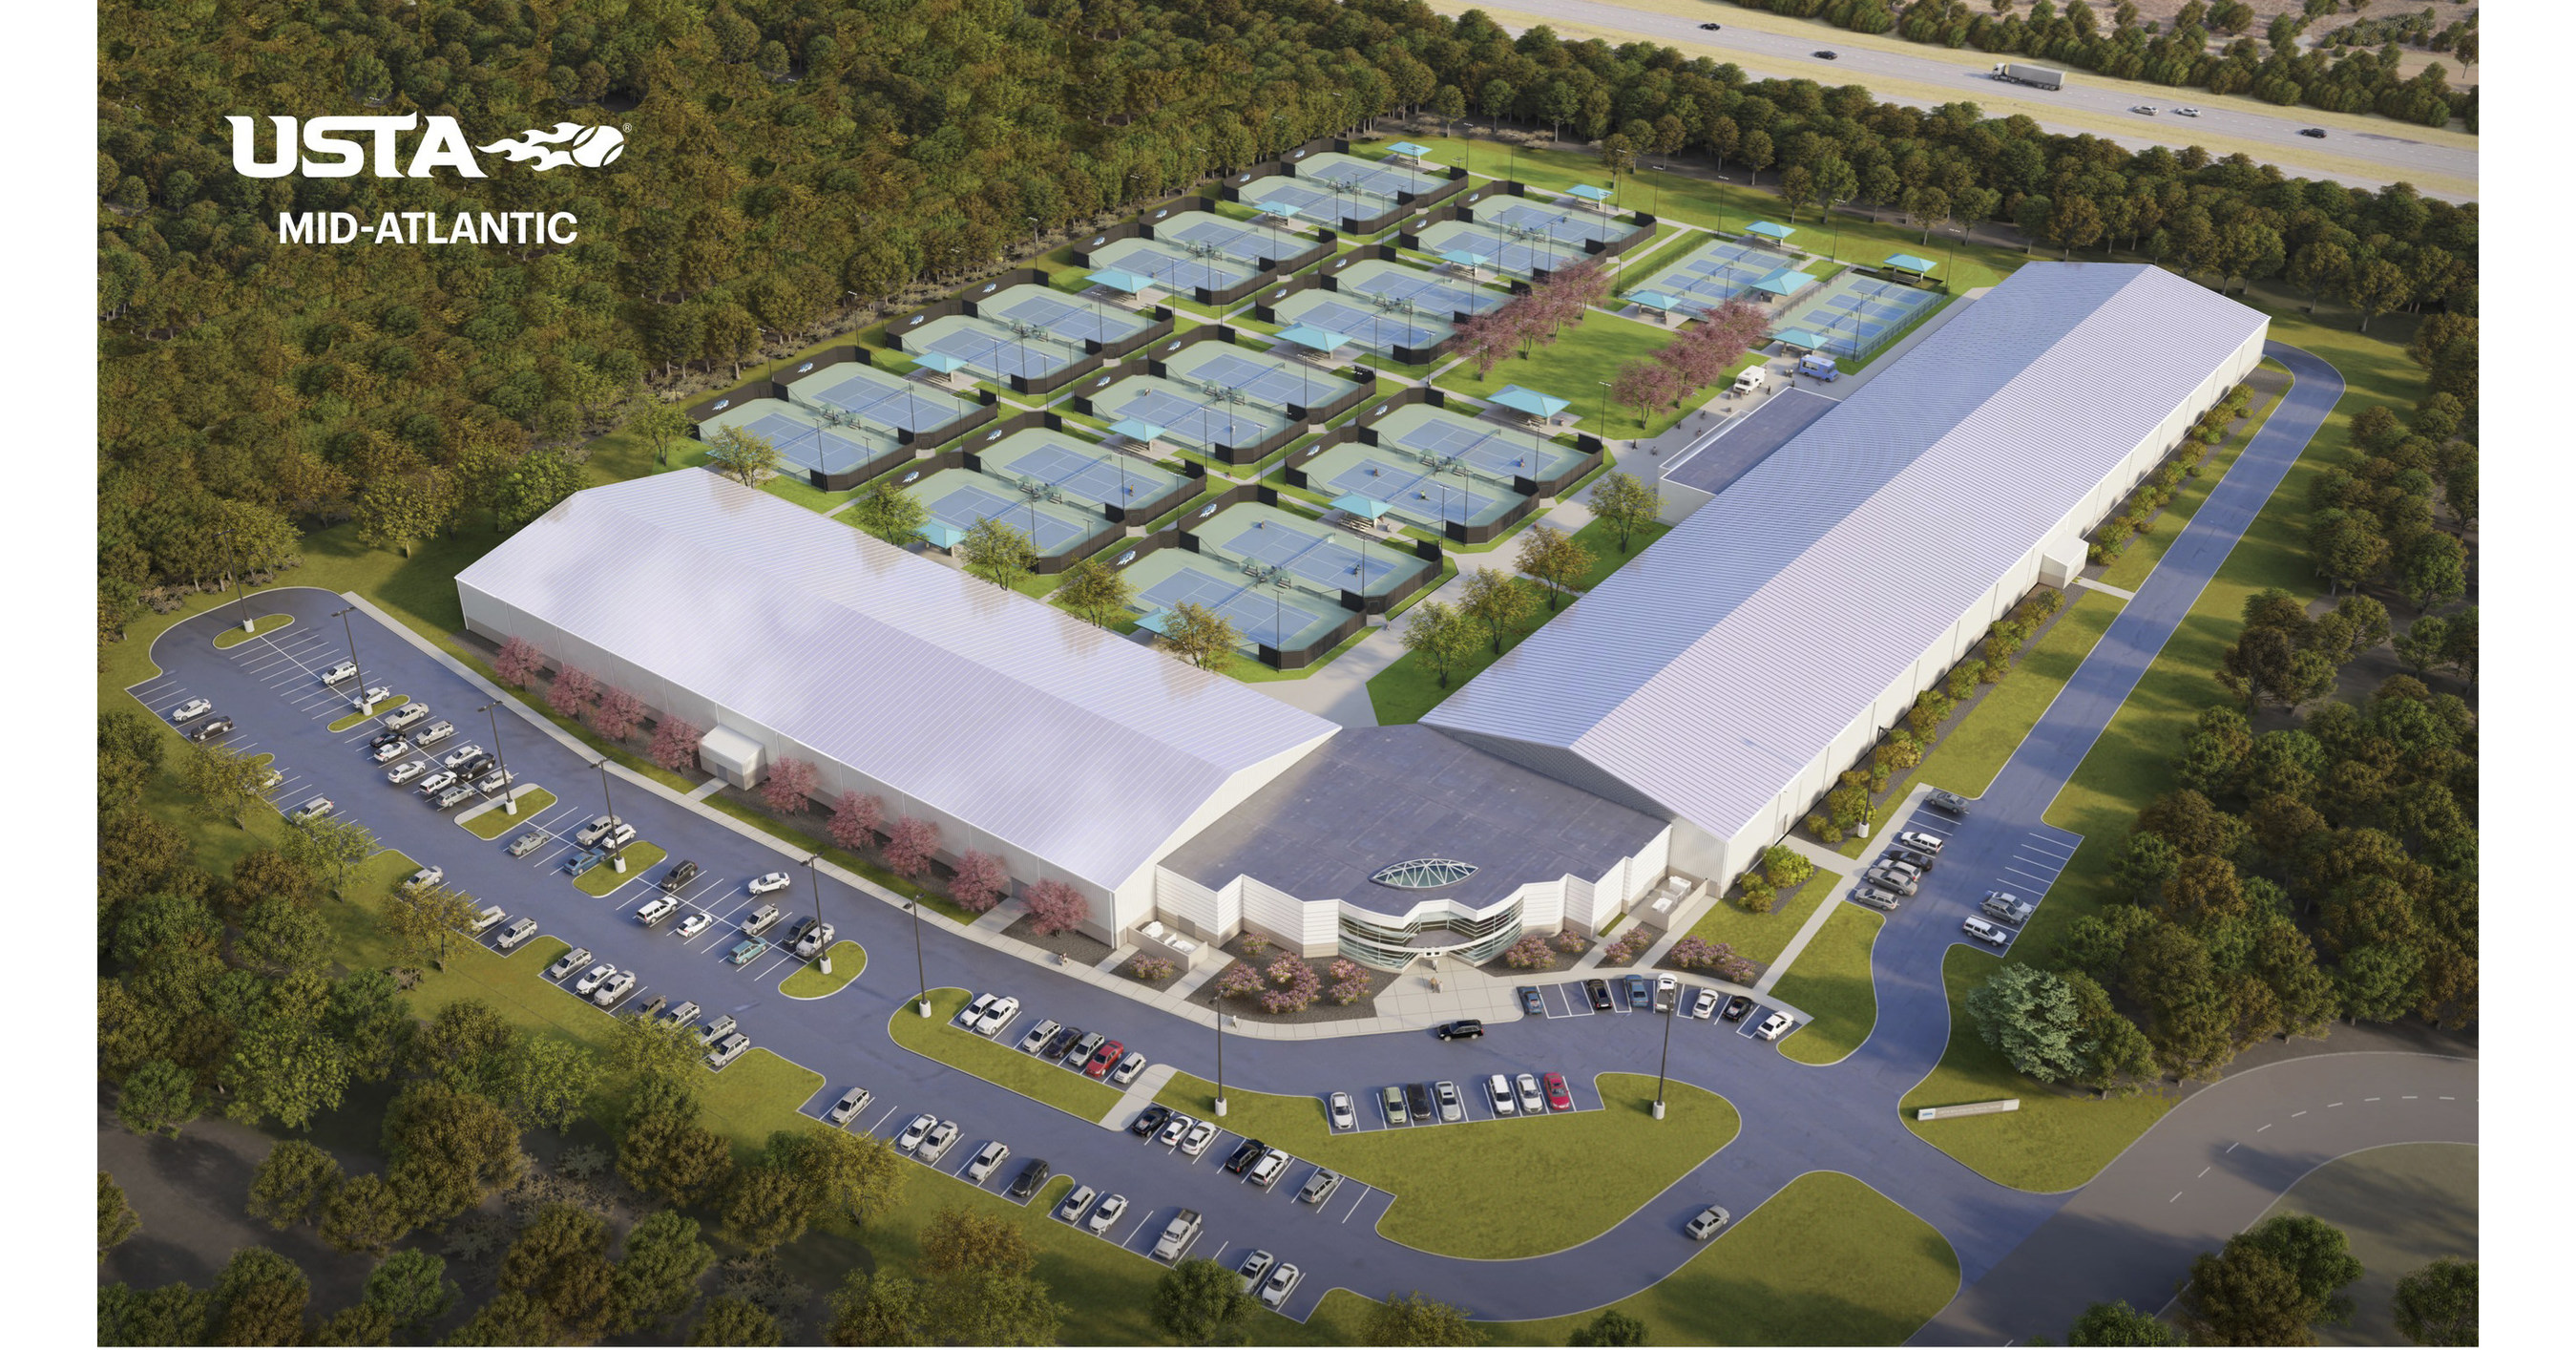 USTA MID-ATLANTIC UNVEILS PLANS FOR WORLD-CLASS TENNIS CAMPUS FOCUSED ON HEALTH, WELLNESS AND COMMUNITY-BUILDING THROUGH SPORT